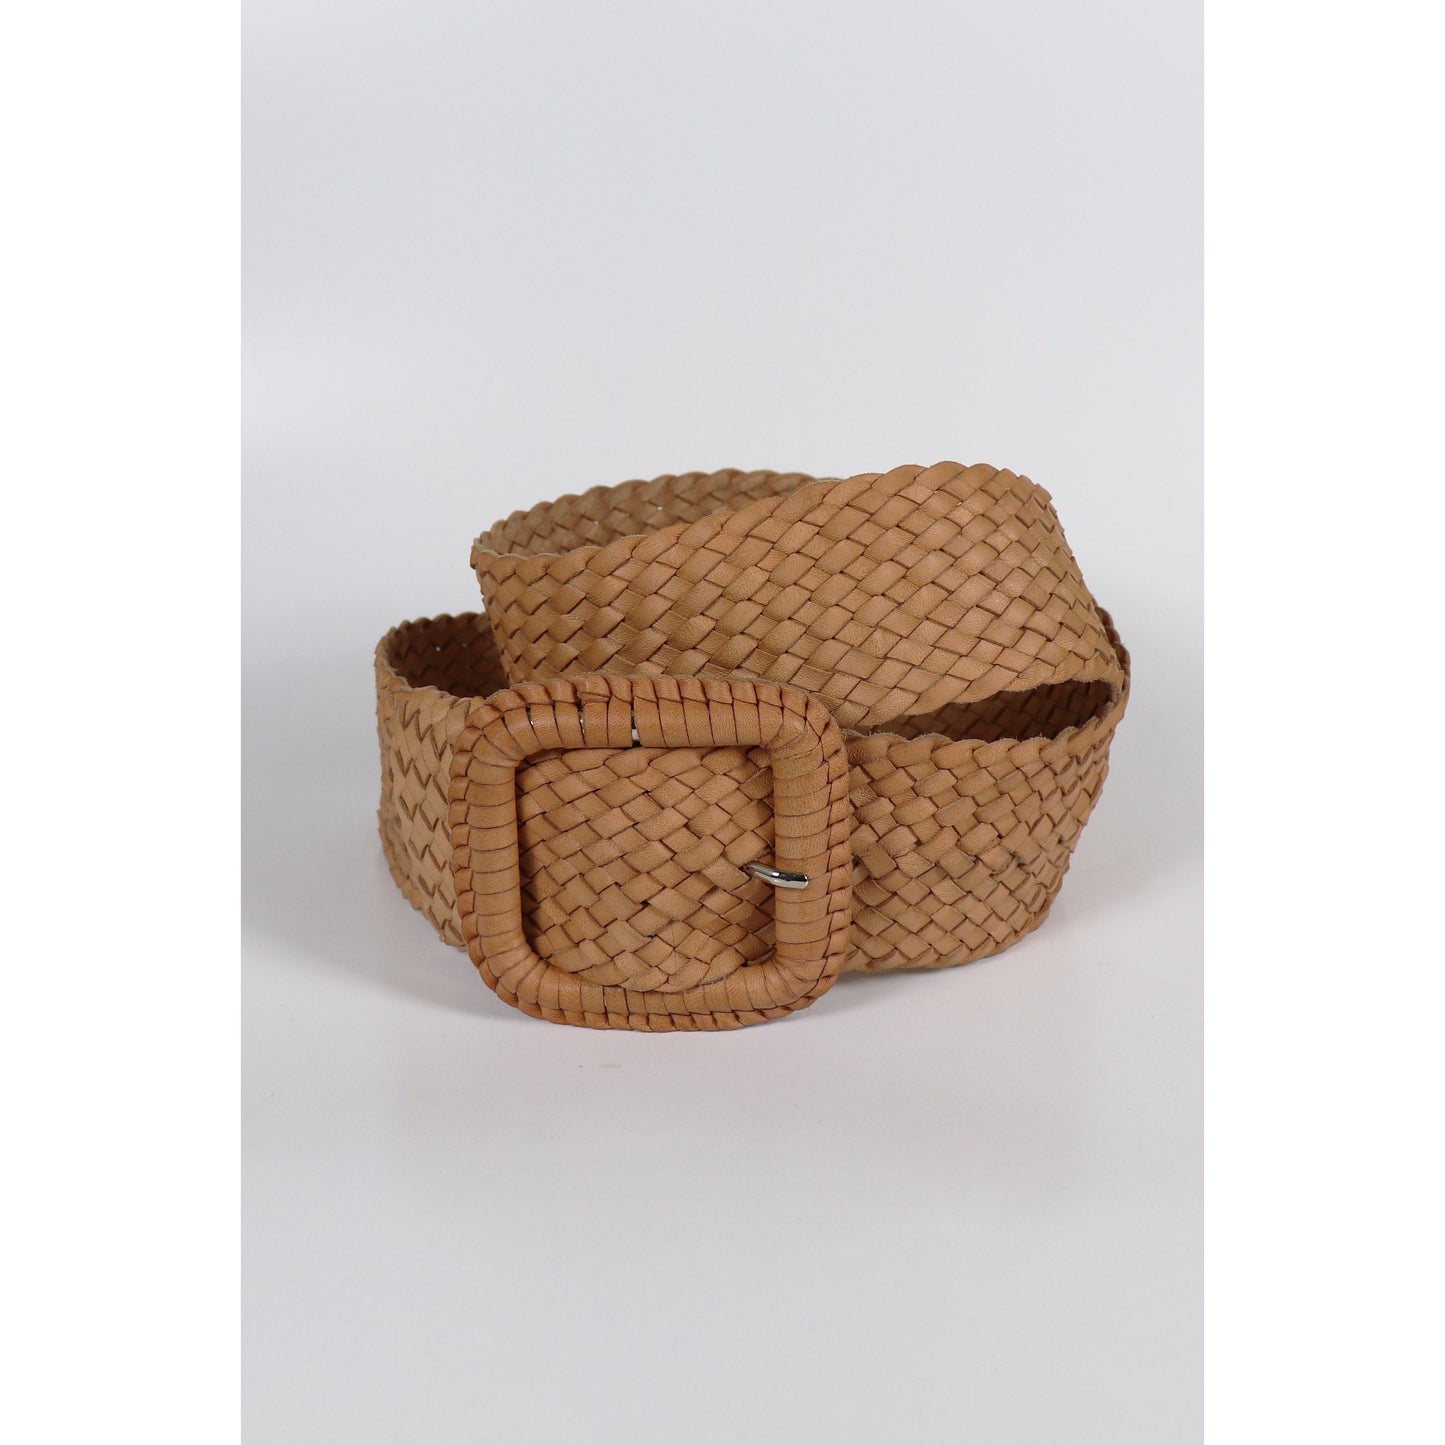 Woven brown belt with buckle.